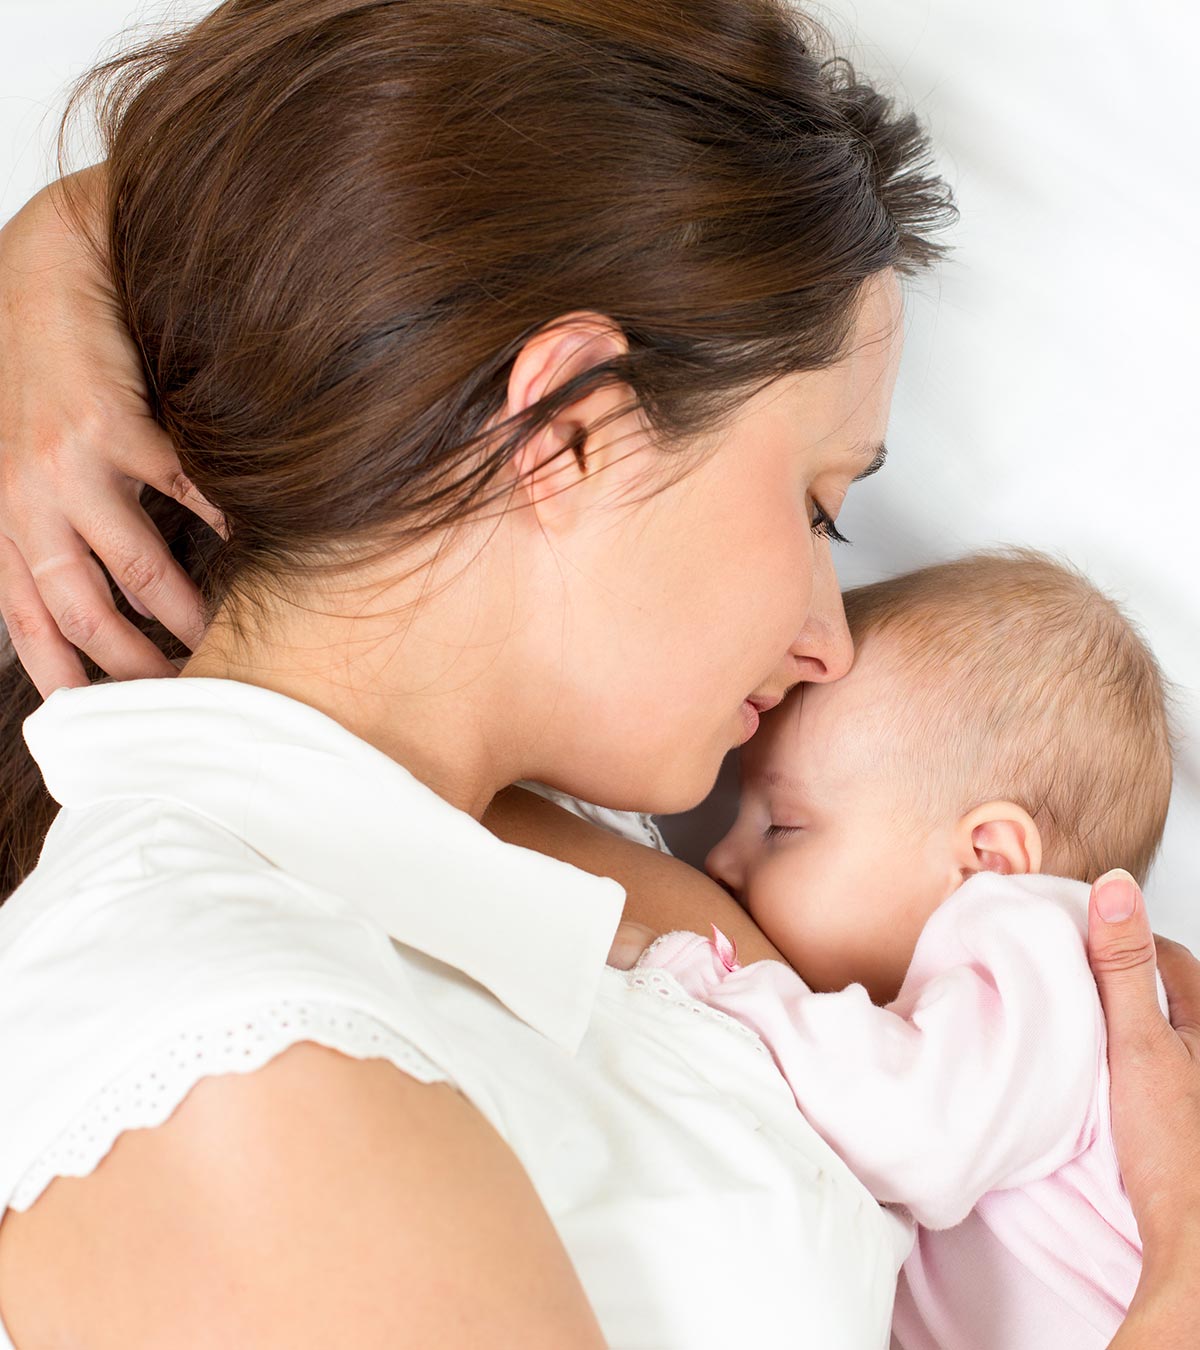 26 Health Benefits Of Breastfeeding For Both Mom And Baby